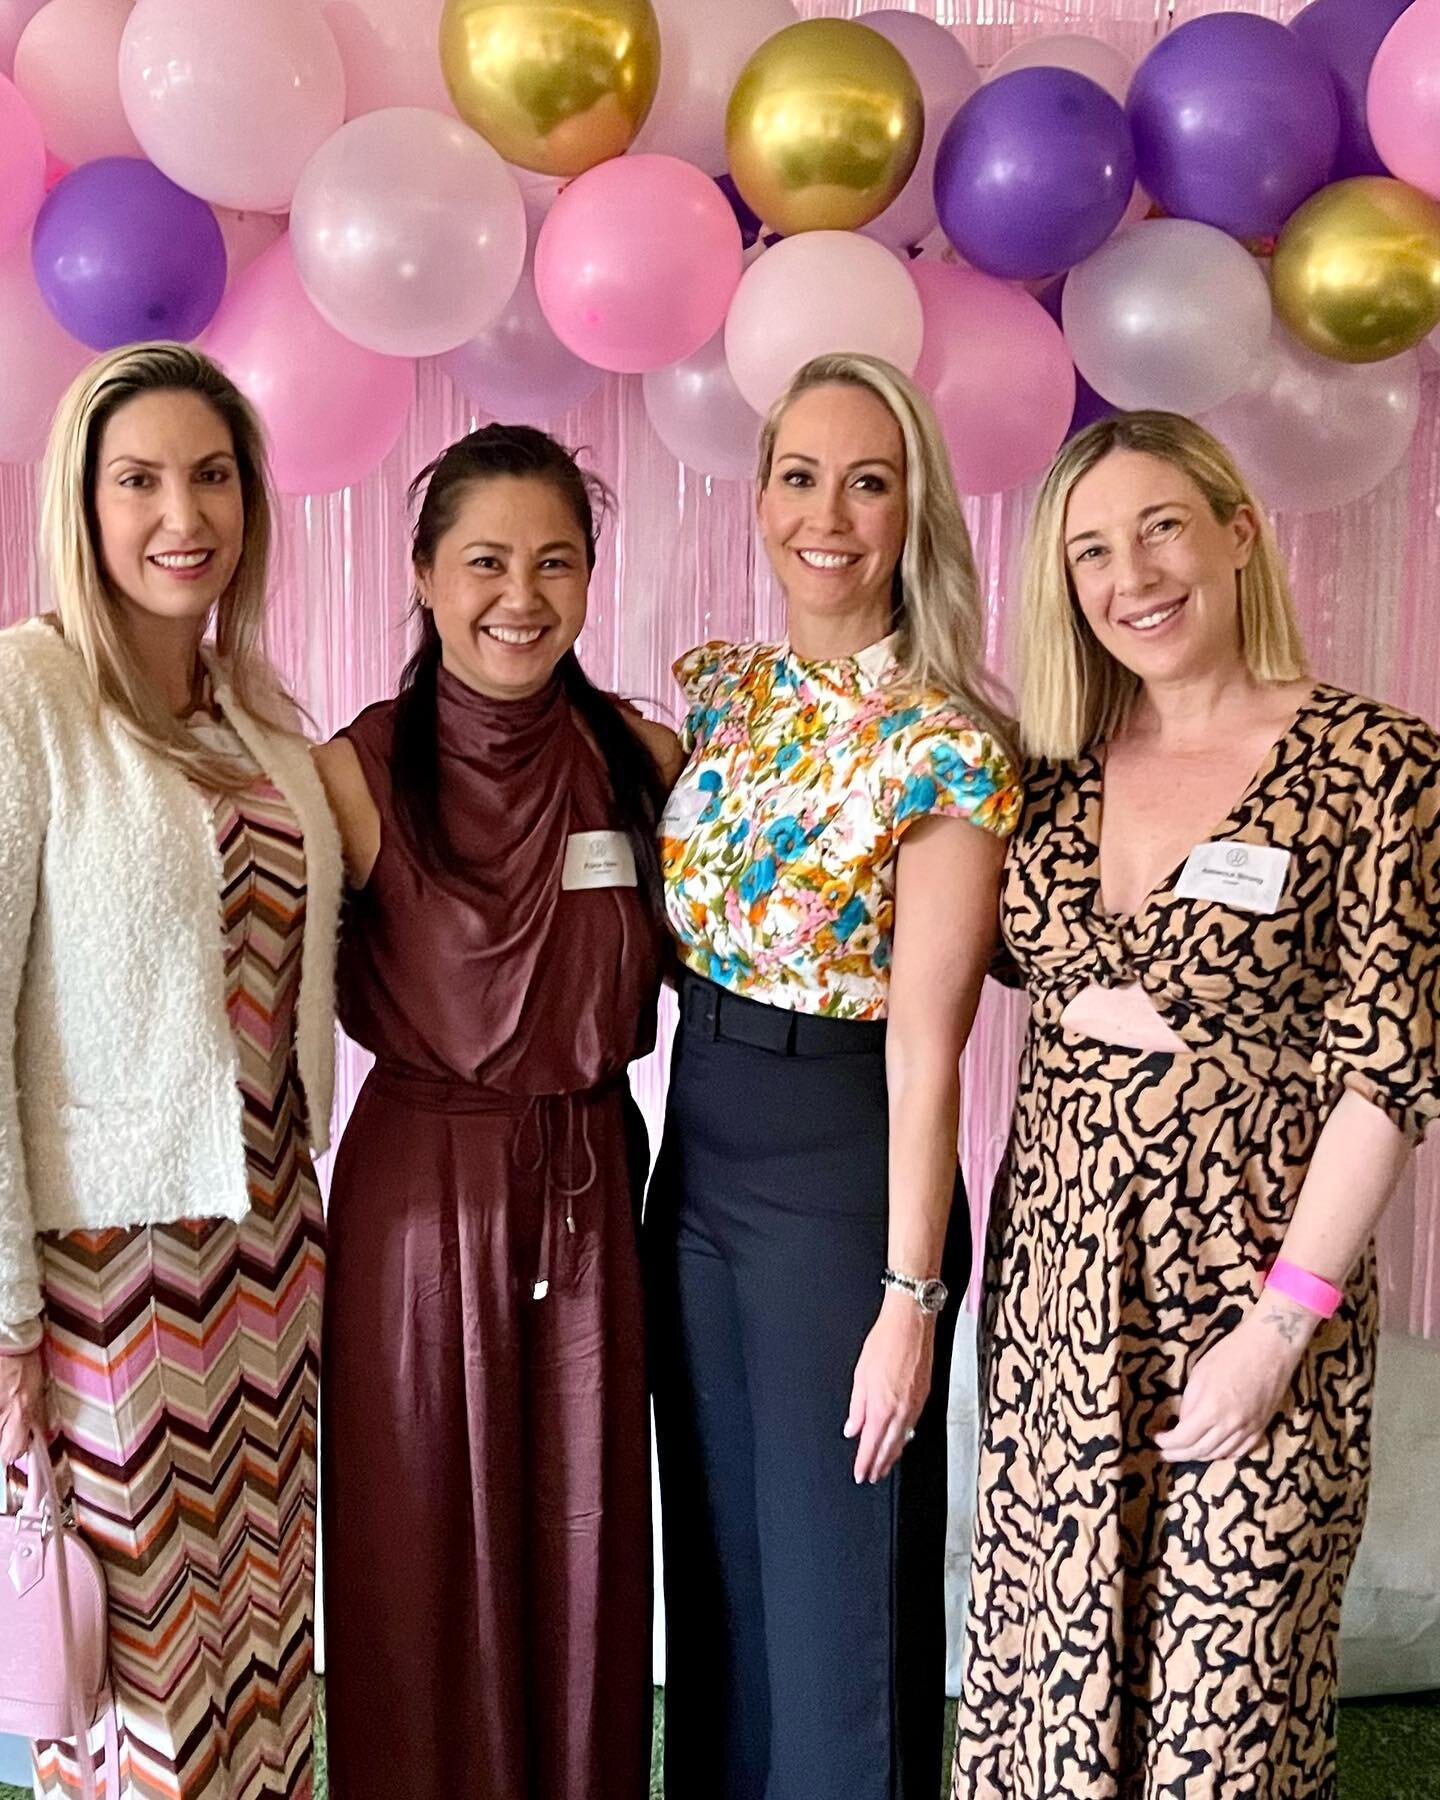 @brisbanewomensclubofficial fundraising event and opportunity to meet some of the @reasontothrive animals. 

There was an exciting announcement about the club&rsquo;s new Patron, Her Excellency the Honourable Dr Jeannette Young PSM, Governor of Queen